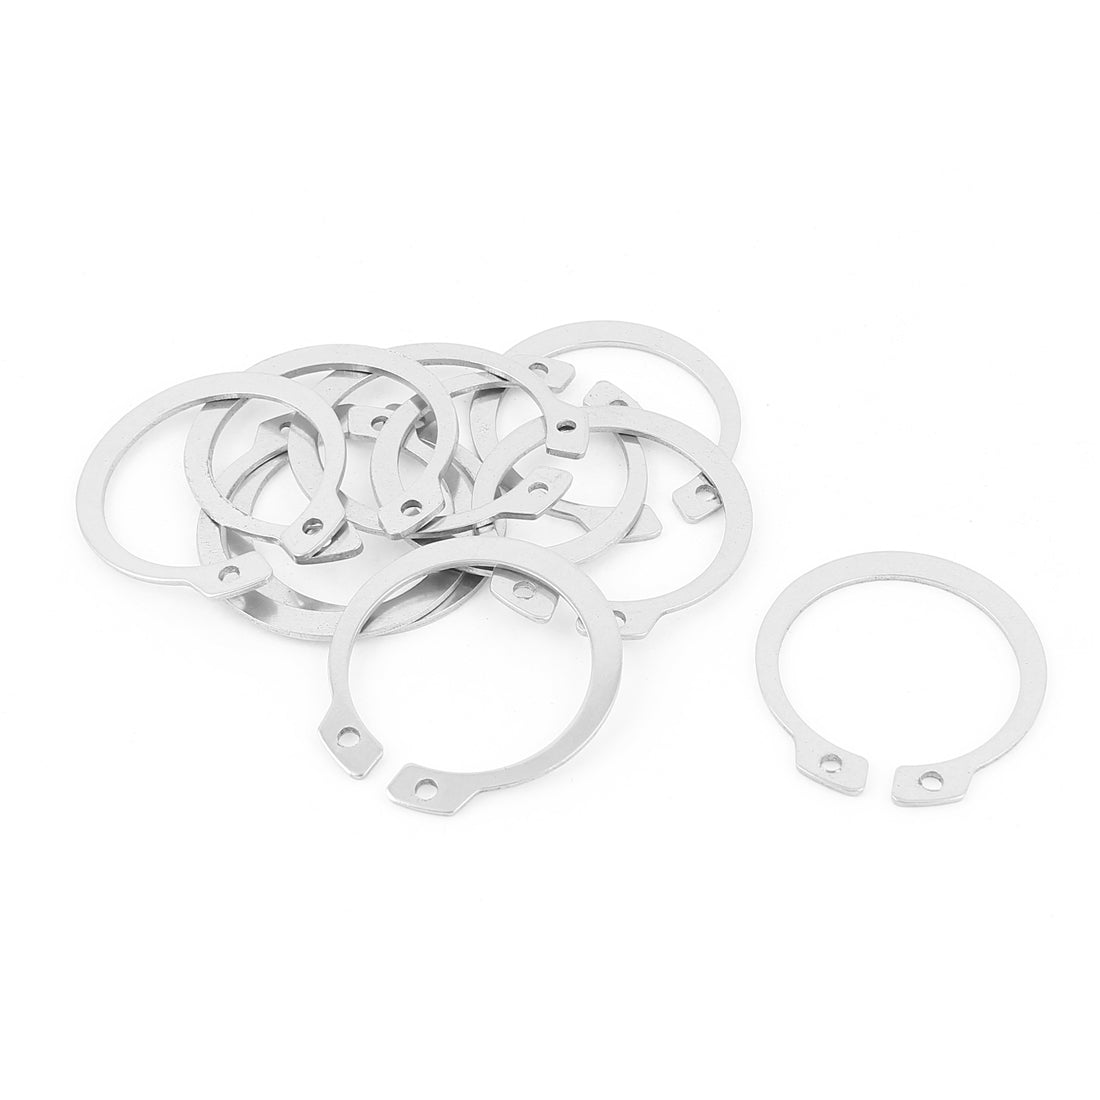 uxcell Uxcell 10pcs 304 Stainless Steel External Circlip Retaining Shaft Snap Rings 30mm